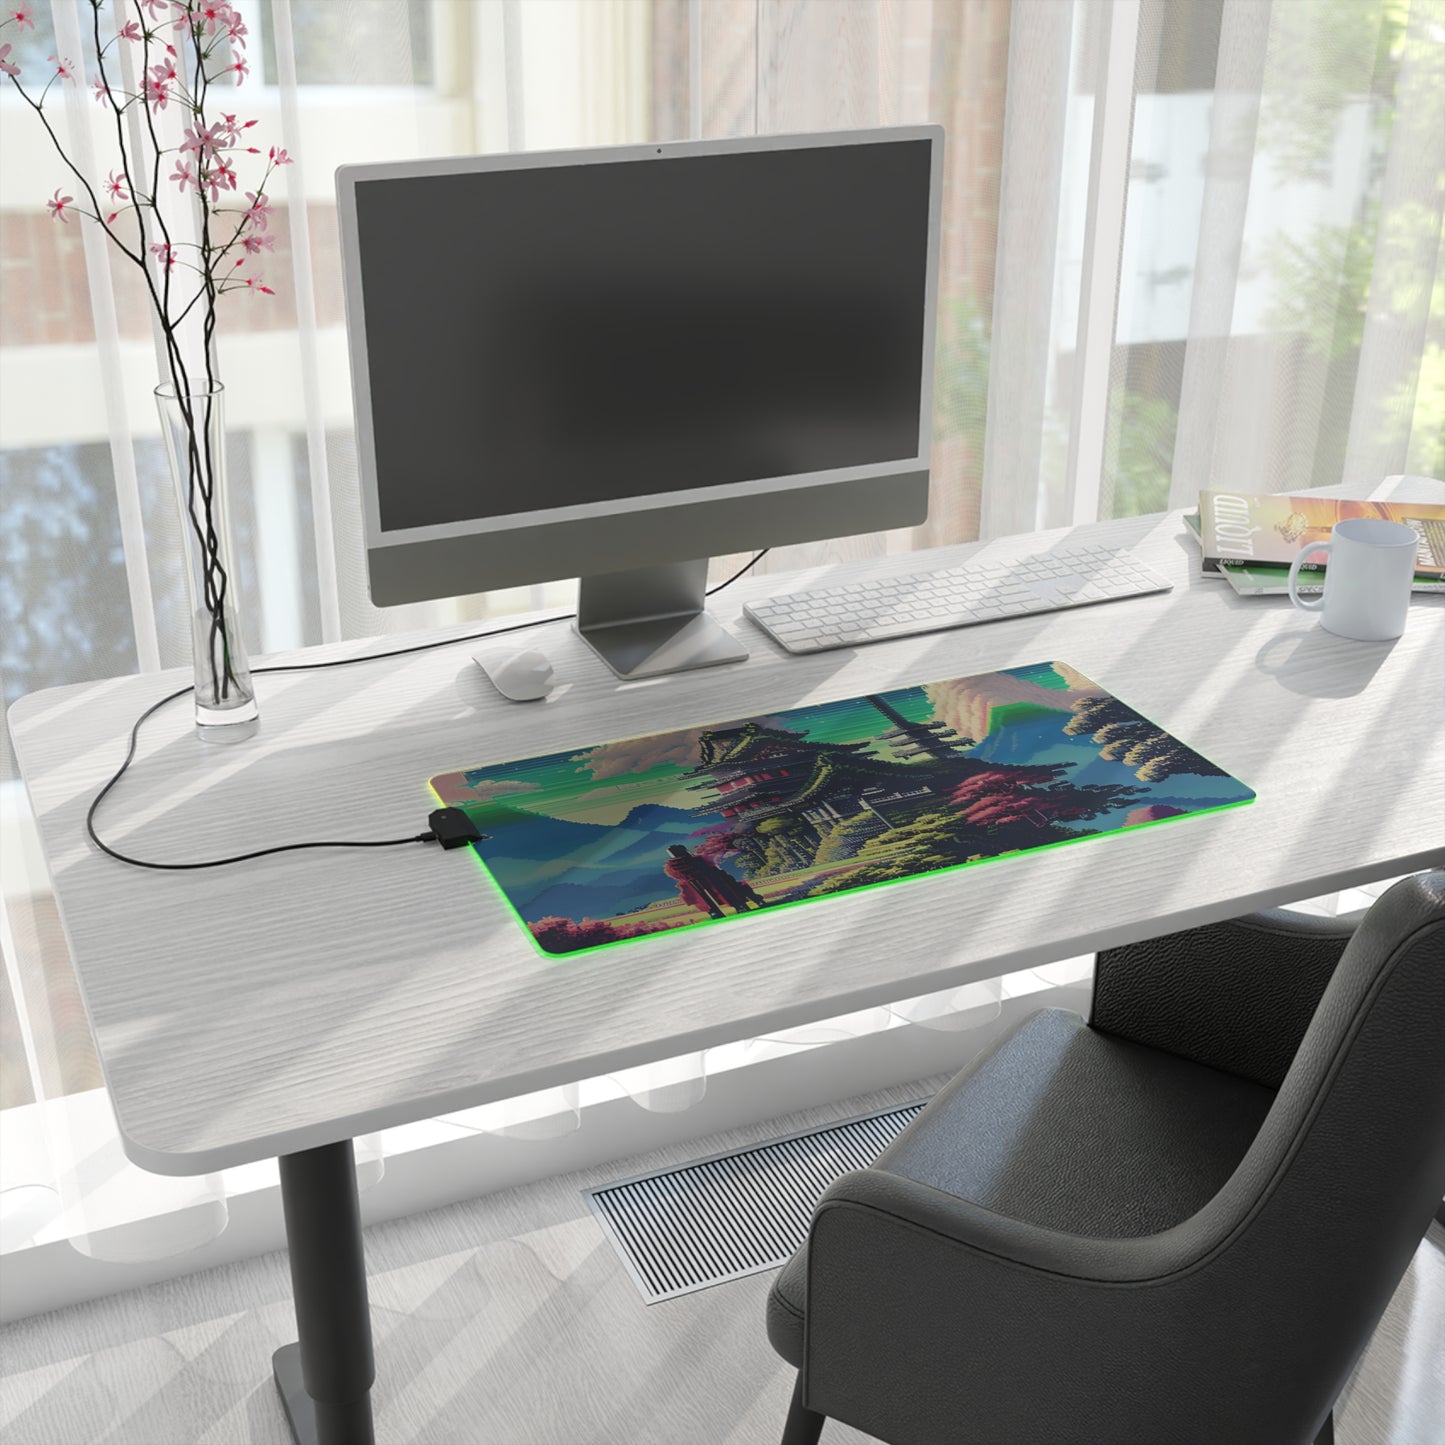 Pixel Mountain Tower LED Gaming Mouse Pad